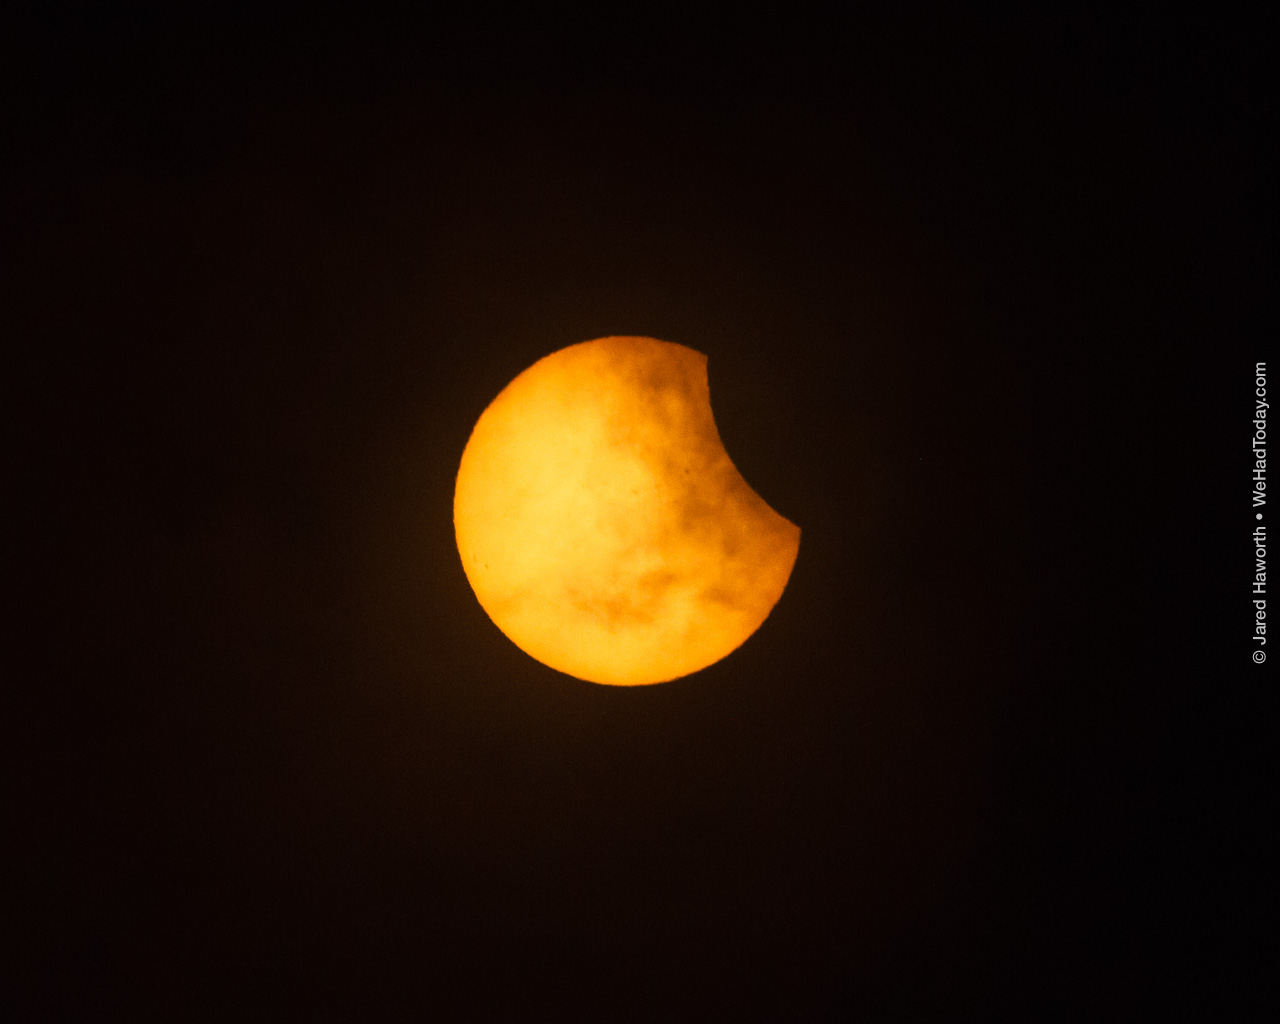 First contact (C1) was hidden behind clouds and rain at our location (Shaw AFB), this was the first clear photo of the partial phase of the eclipse, as the clouds were clearing.